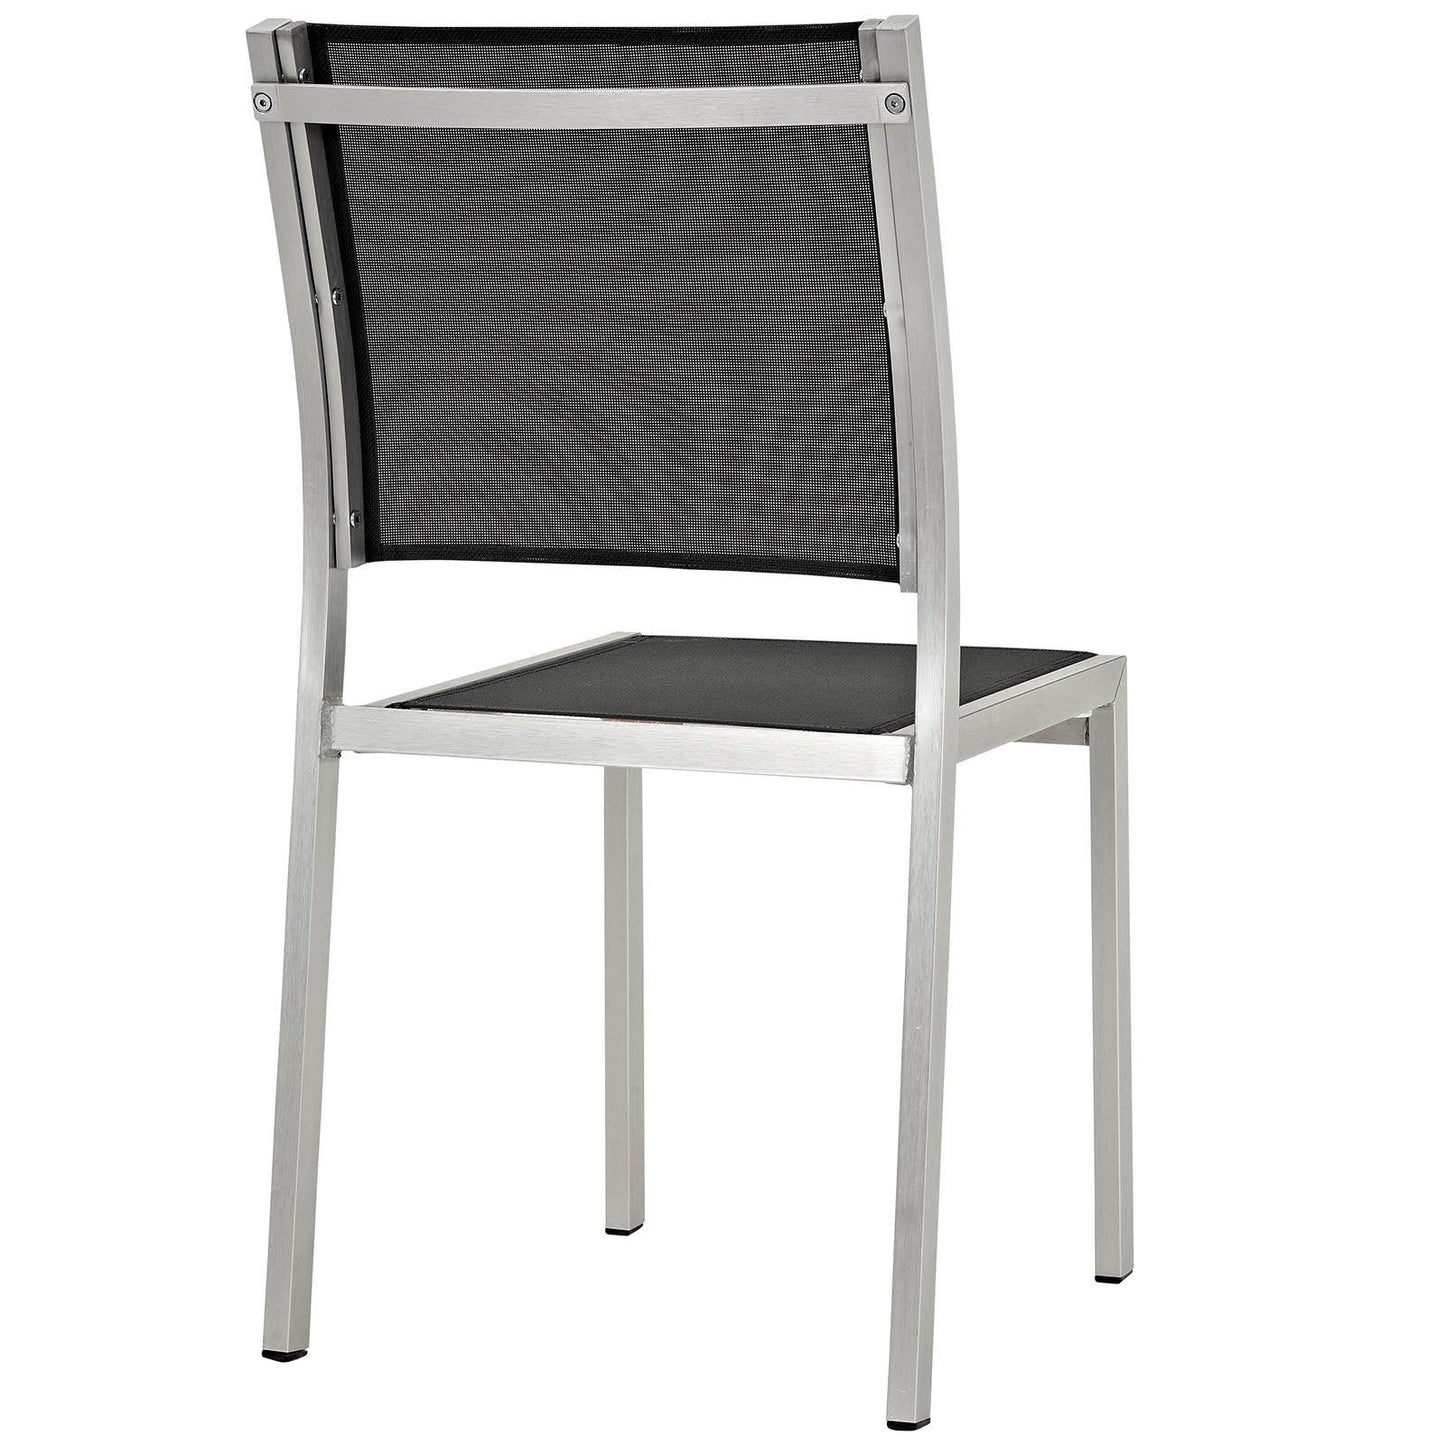 Modway Shore Side Chair Outdoor Patio Aluminum Set of 2 FredCo